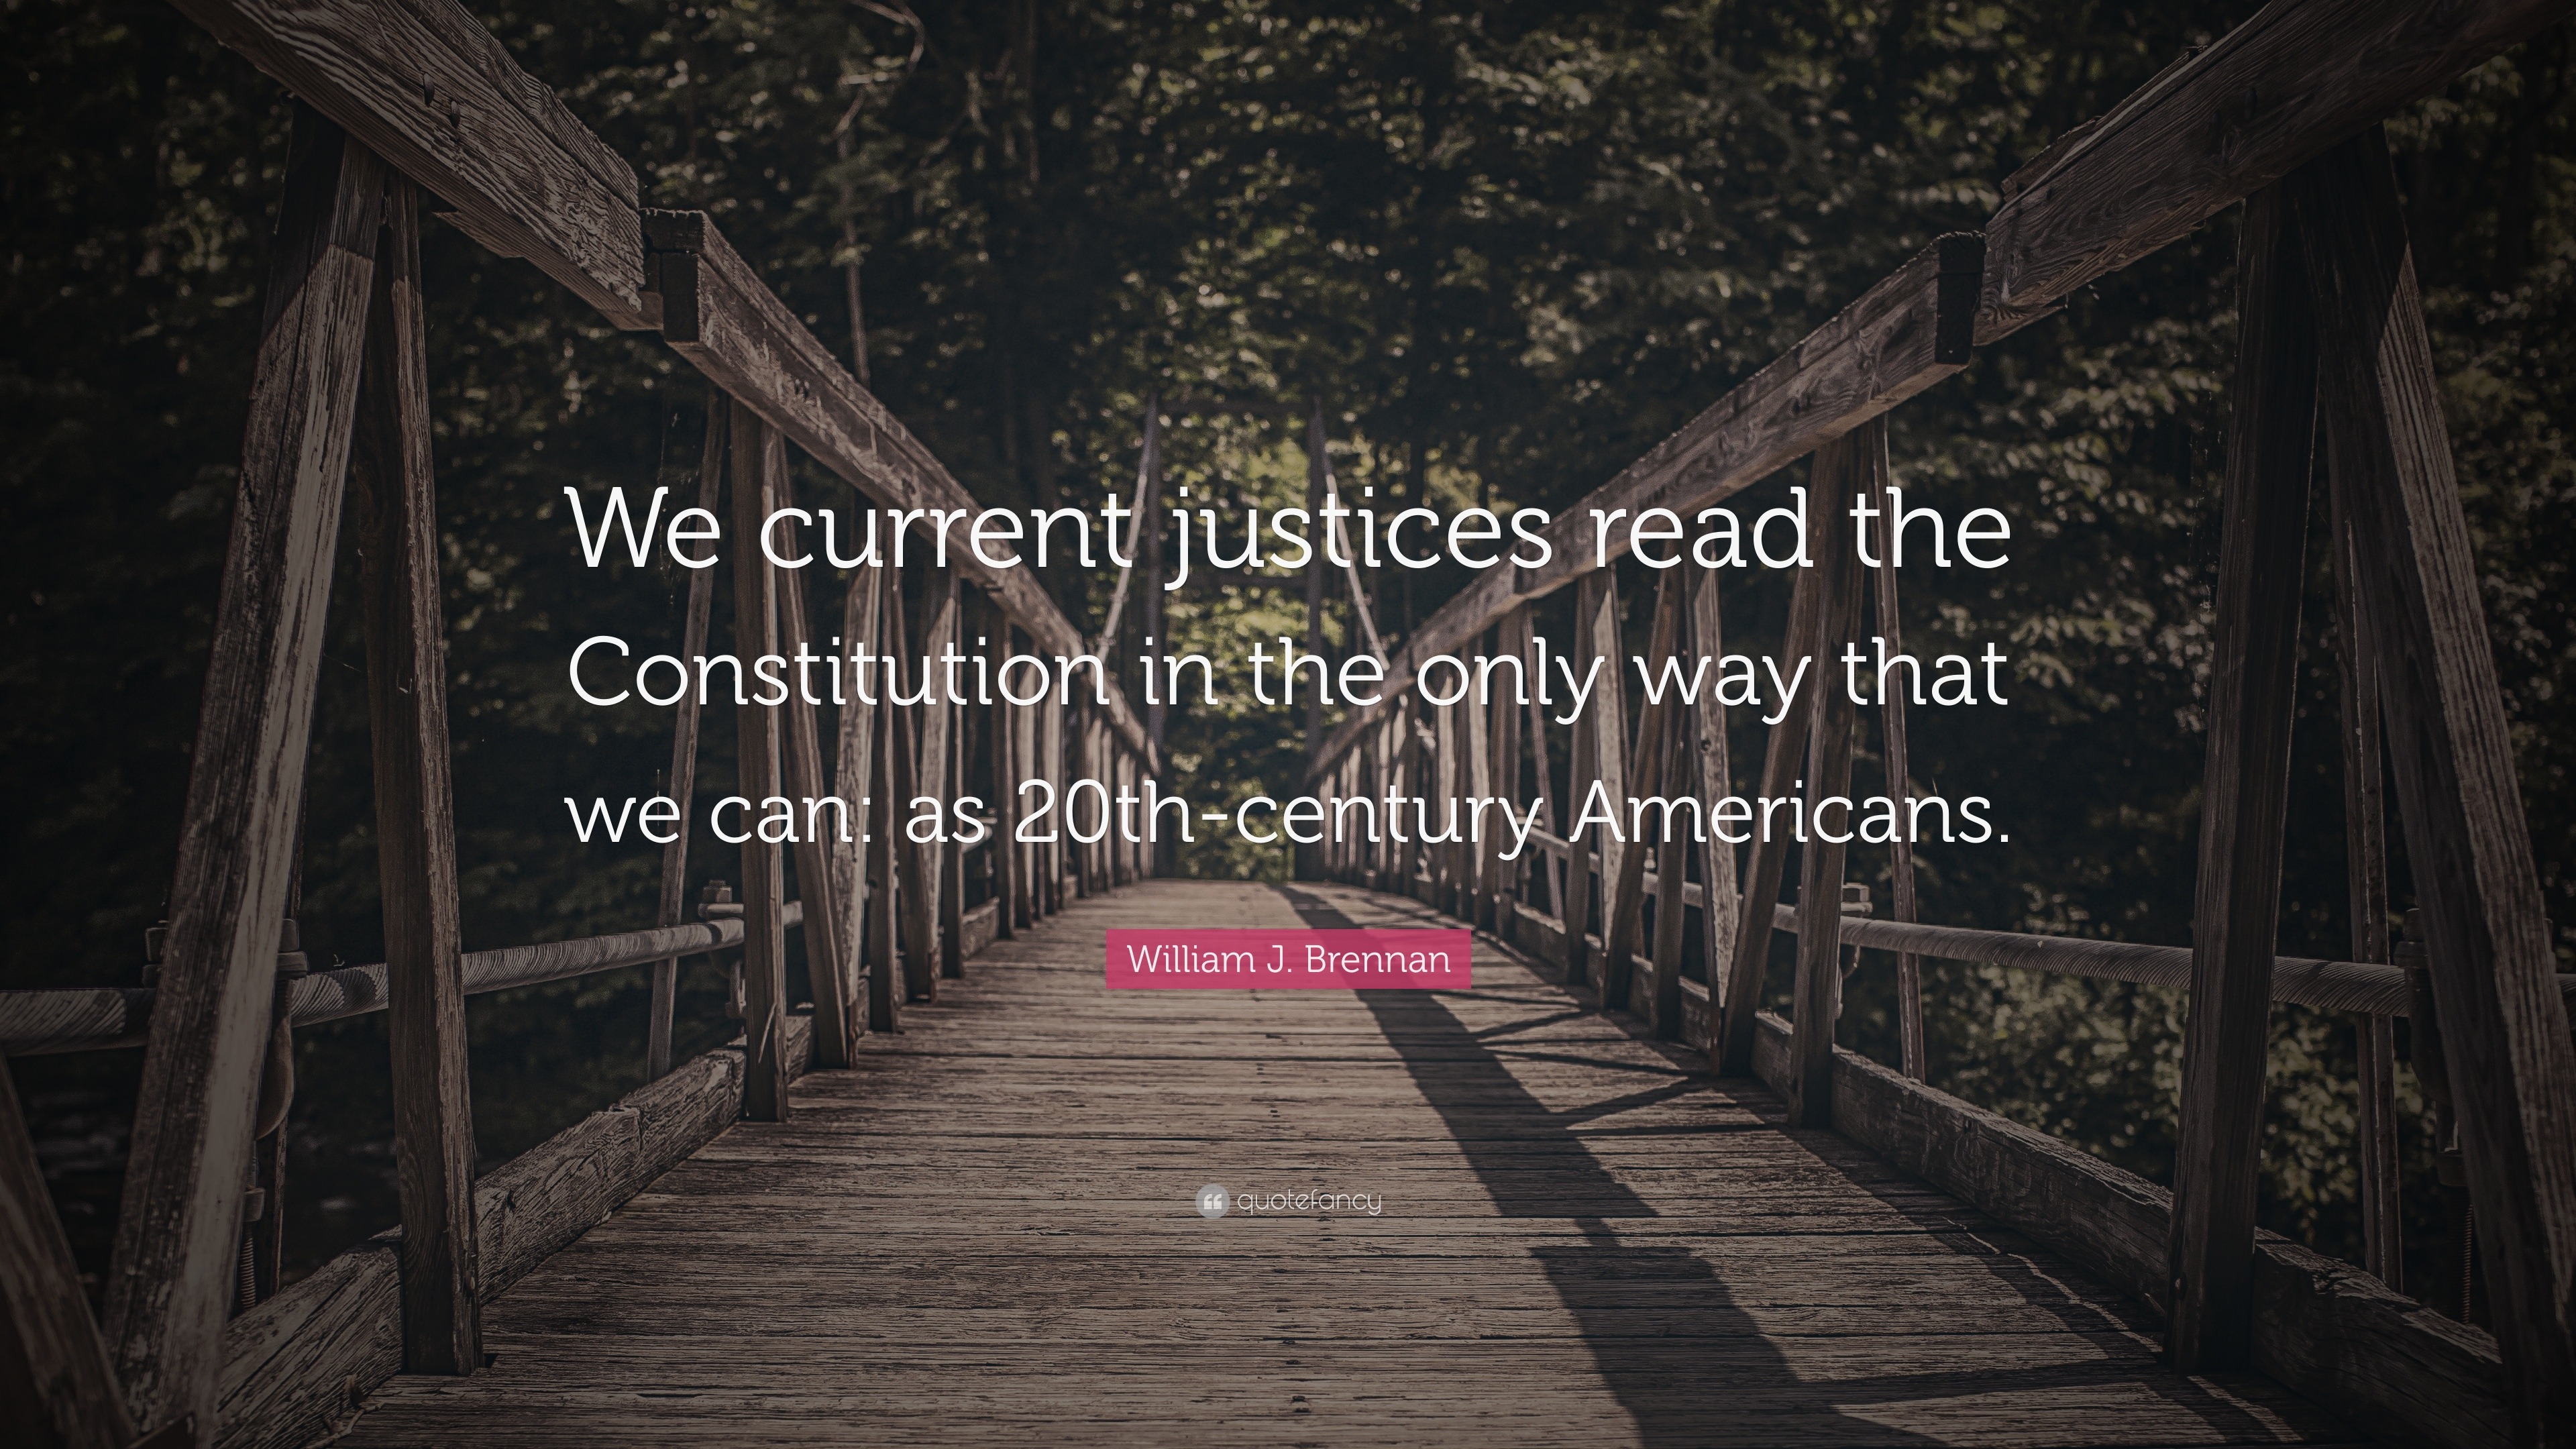 William J Brennan Quote “we Current Justices Read The Constitution In The Only Way That We Can 8214